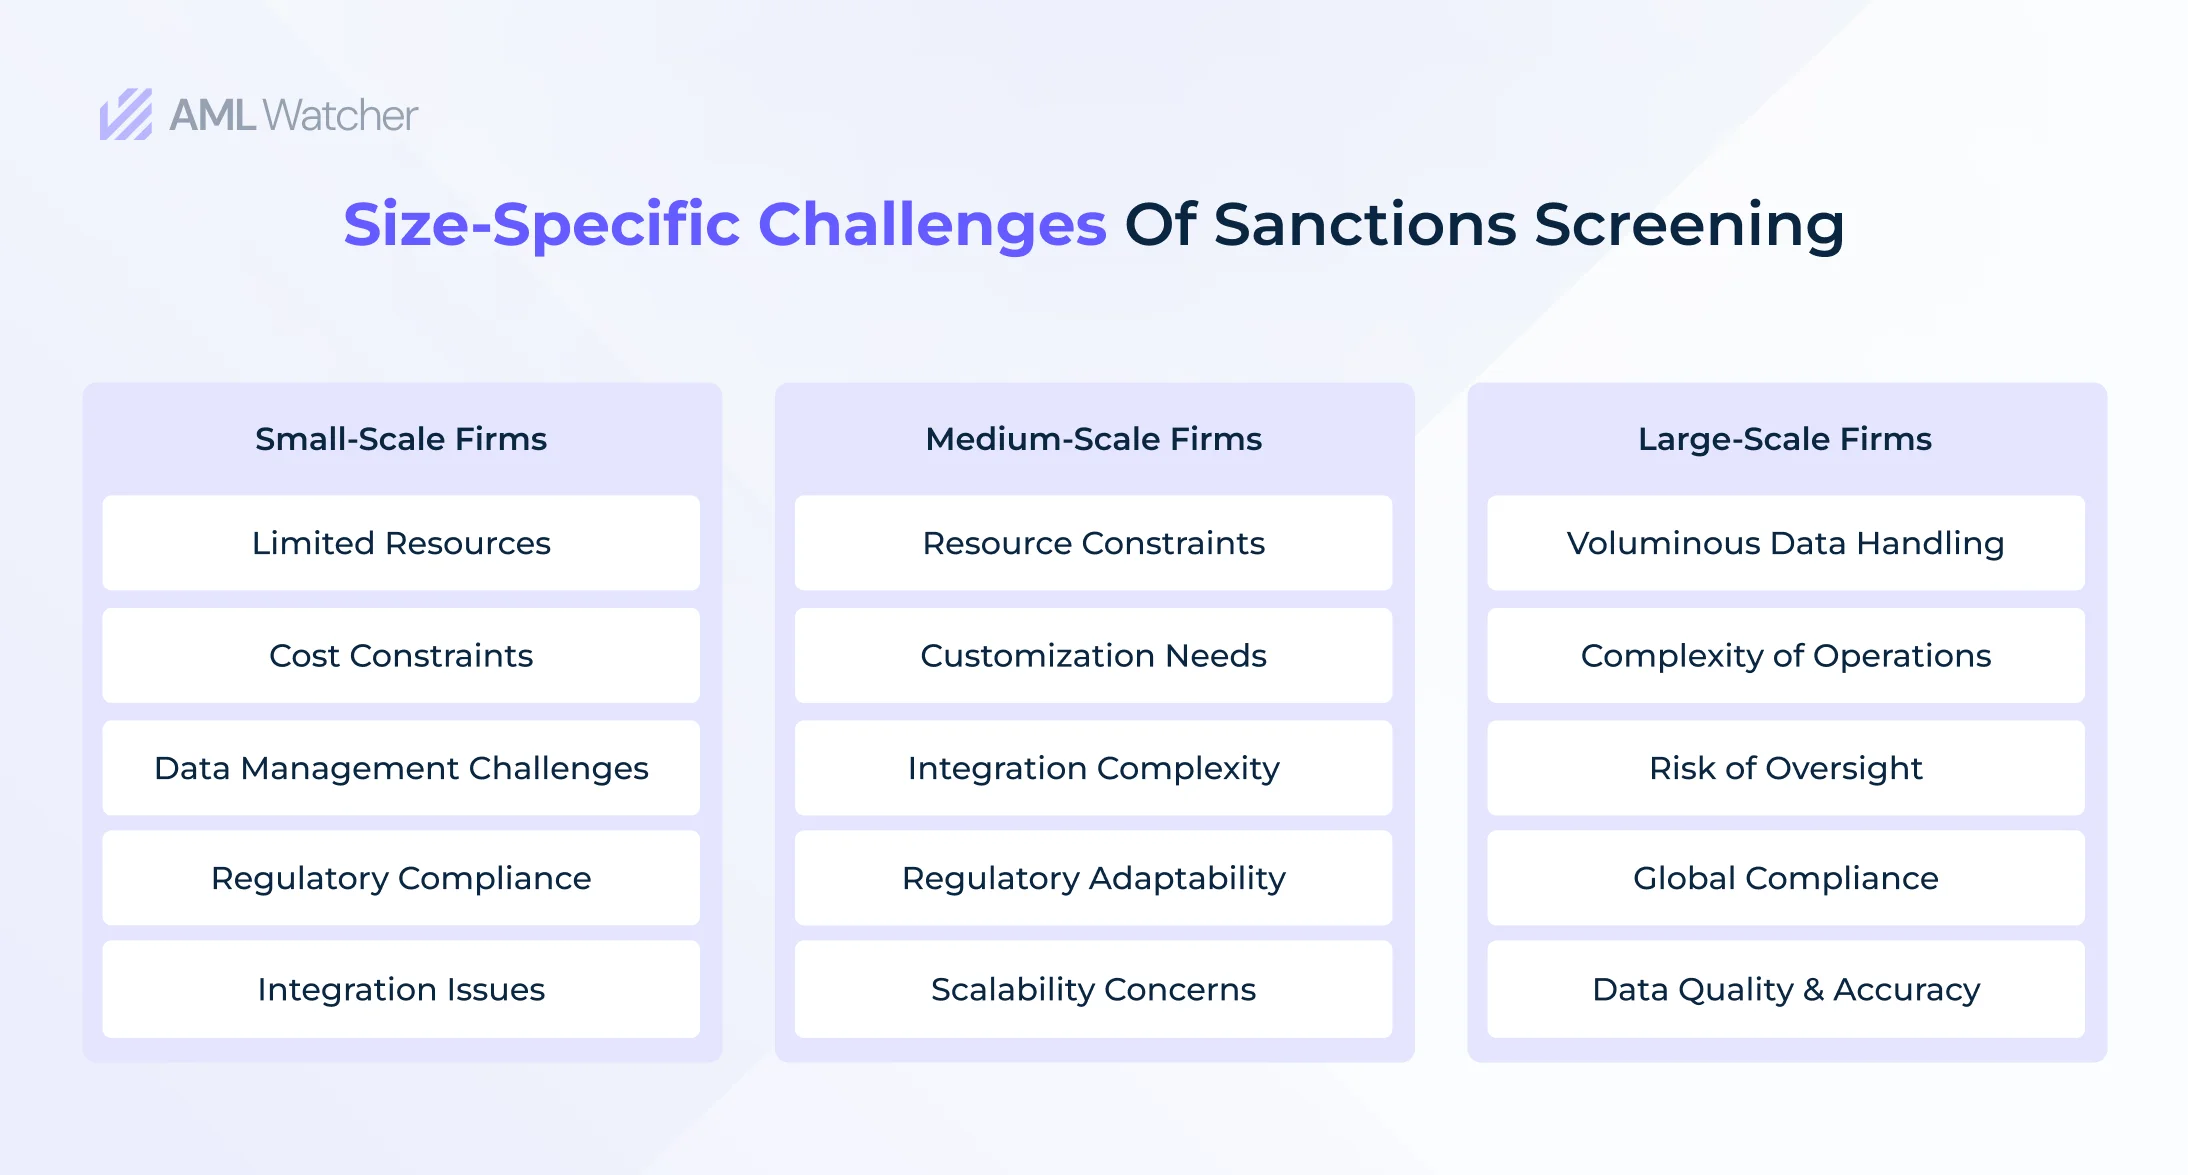 A thorough review of challenges and roadblocks of sanctions screening faced by small to large scale firms including huge data management, resource allocation, cost constraints, meeting regulatory requirements, and more. 